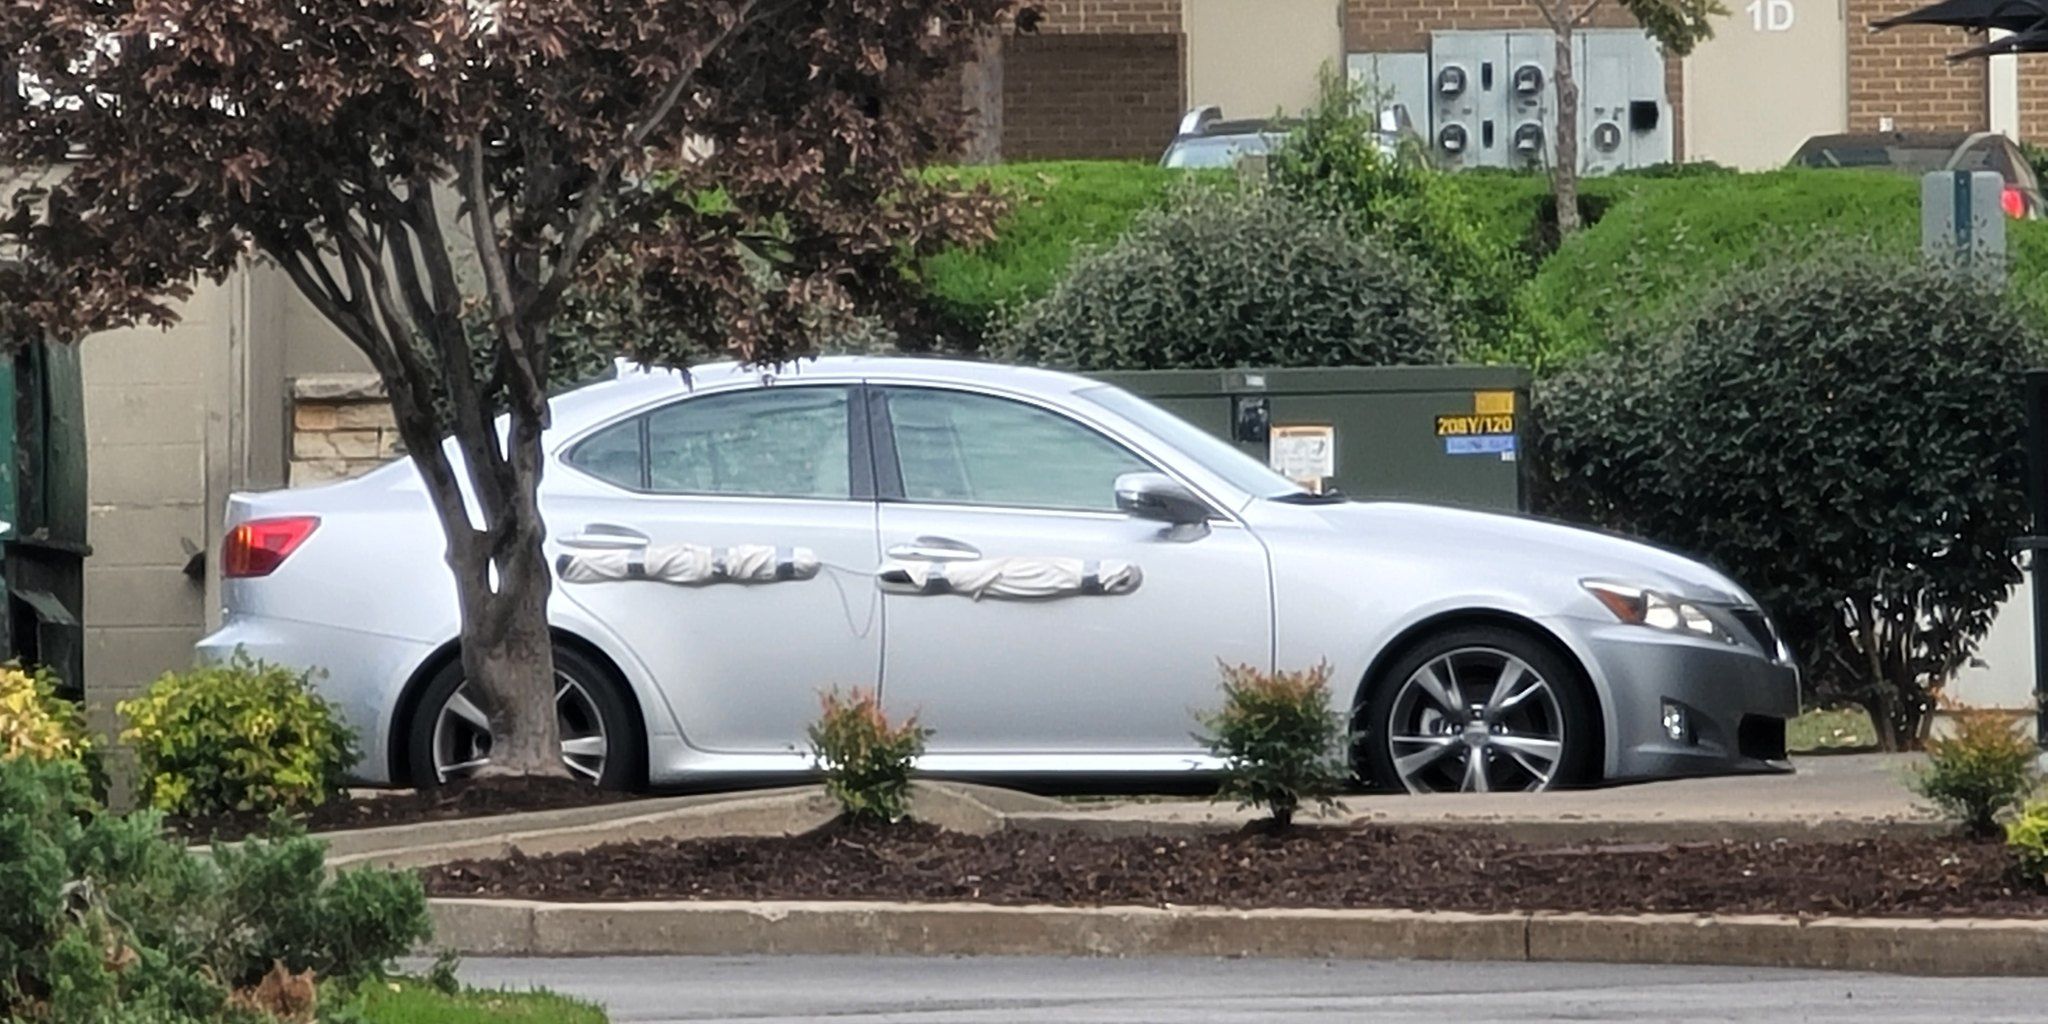 Man Causes Bomb Scare with Homemade Dent Protectors on Lexus